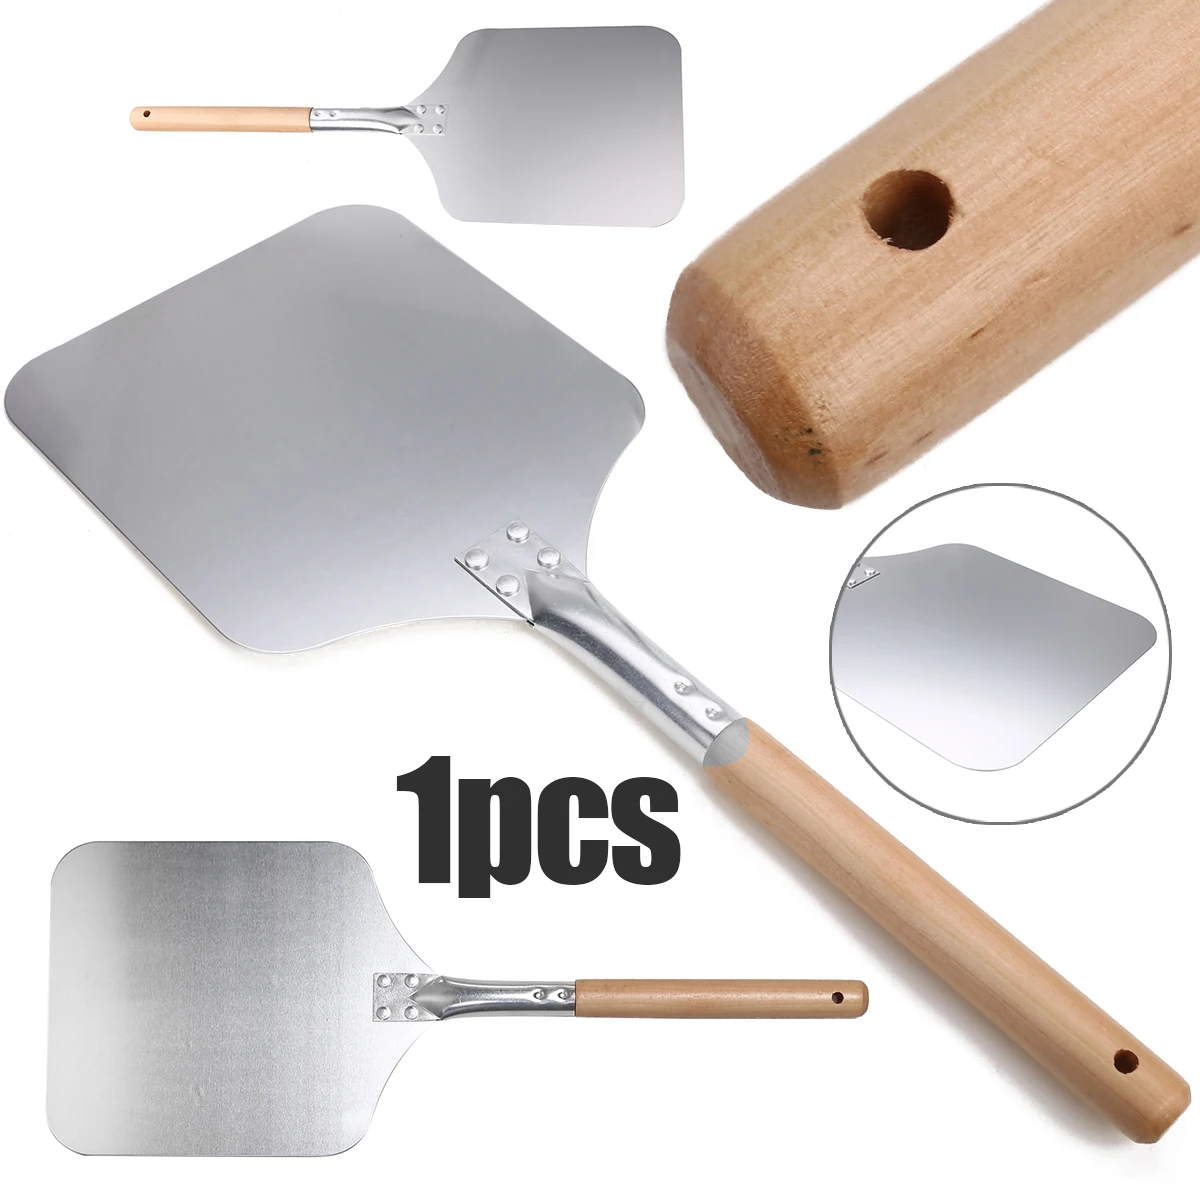 25.4 cm Heavy Duty Pizza Lifter Oversized Stainless Steel Cake Lifter with Wooden Handle Pizza Peel Paddle for Baking Homemade Pizza 10 Pizza Pie Serving Tray Oven Spatula. 